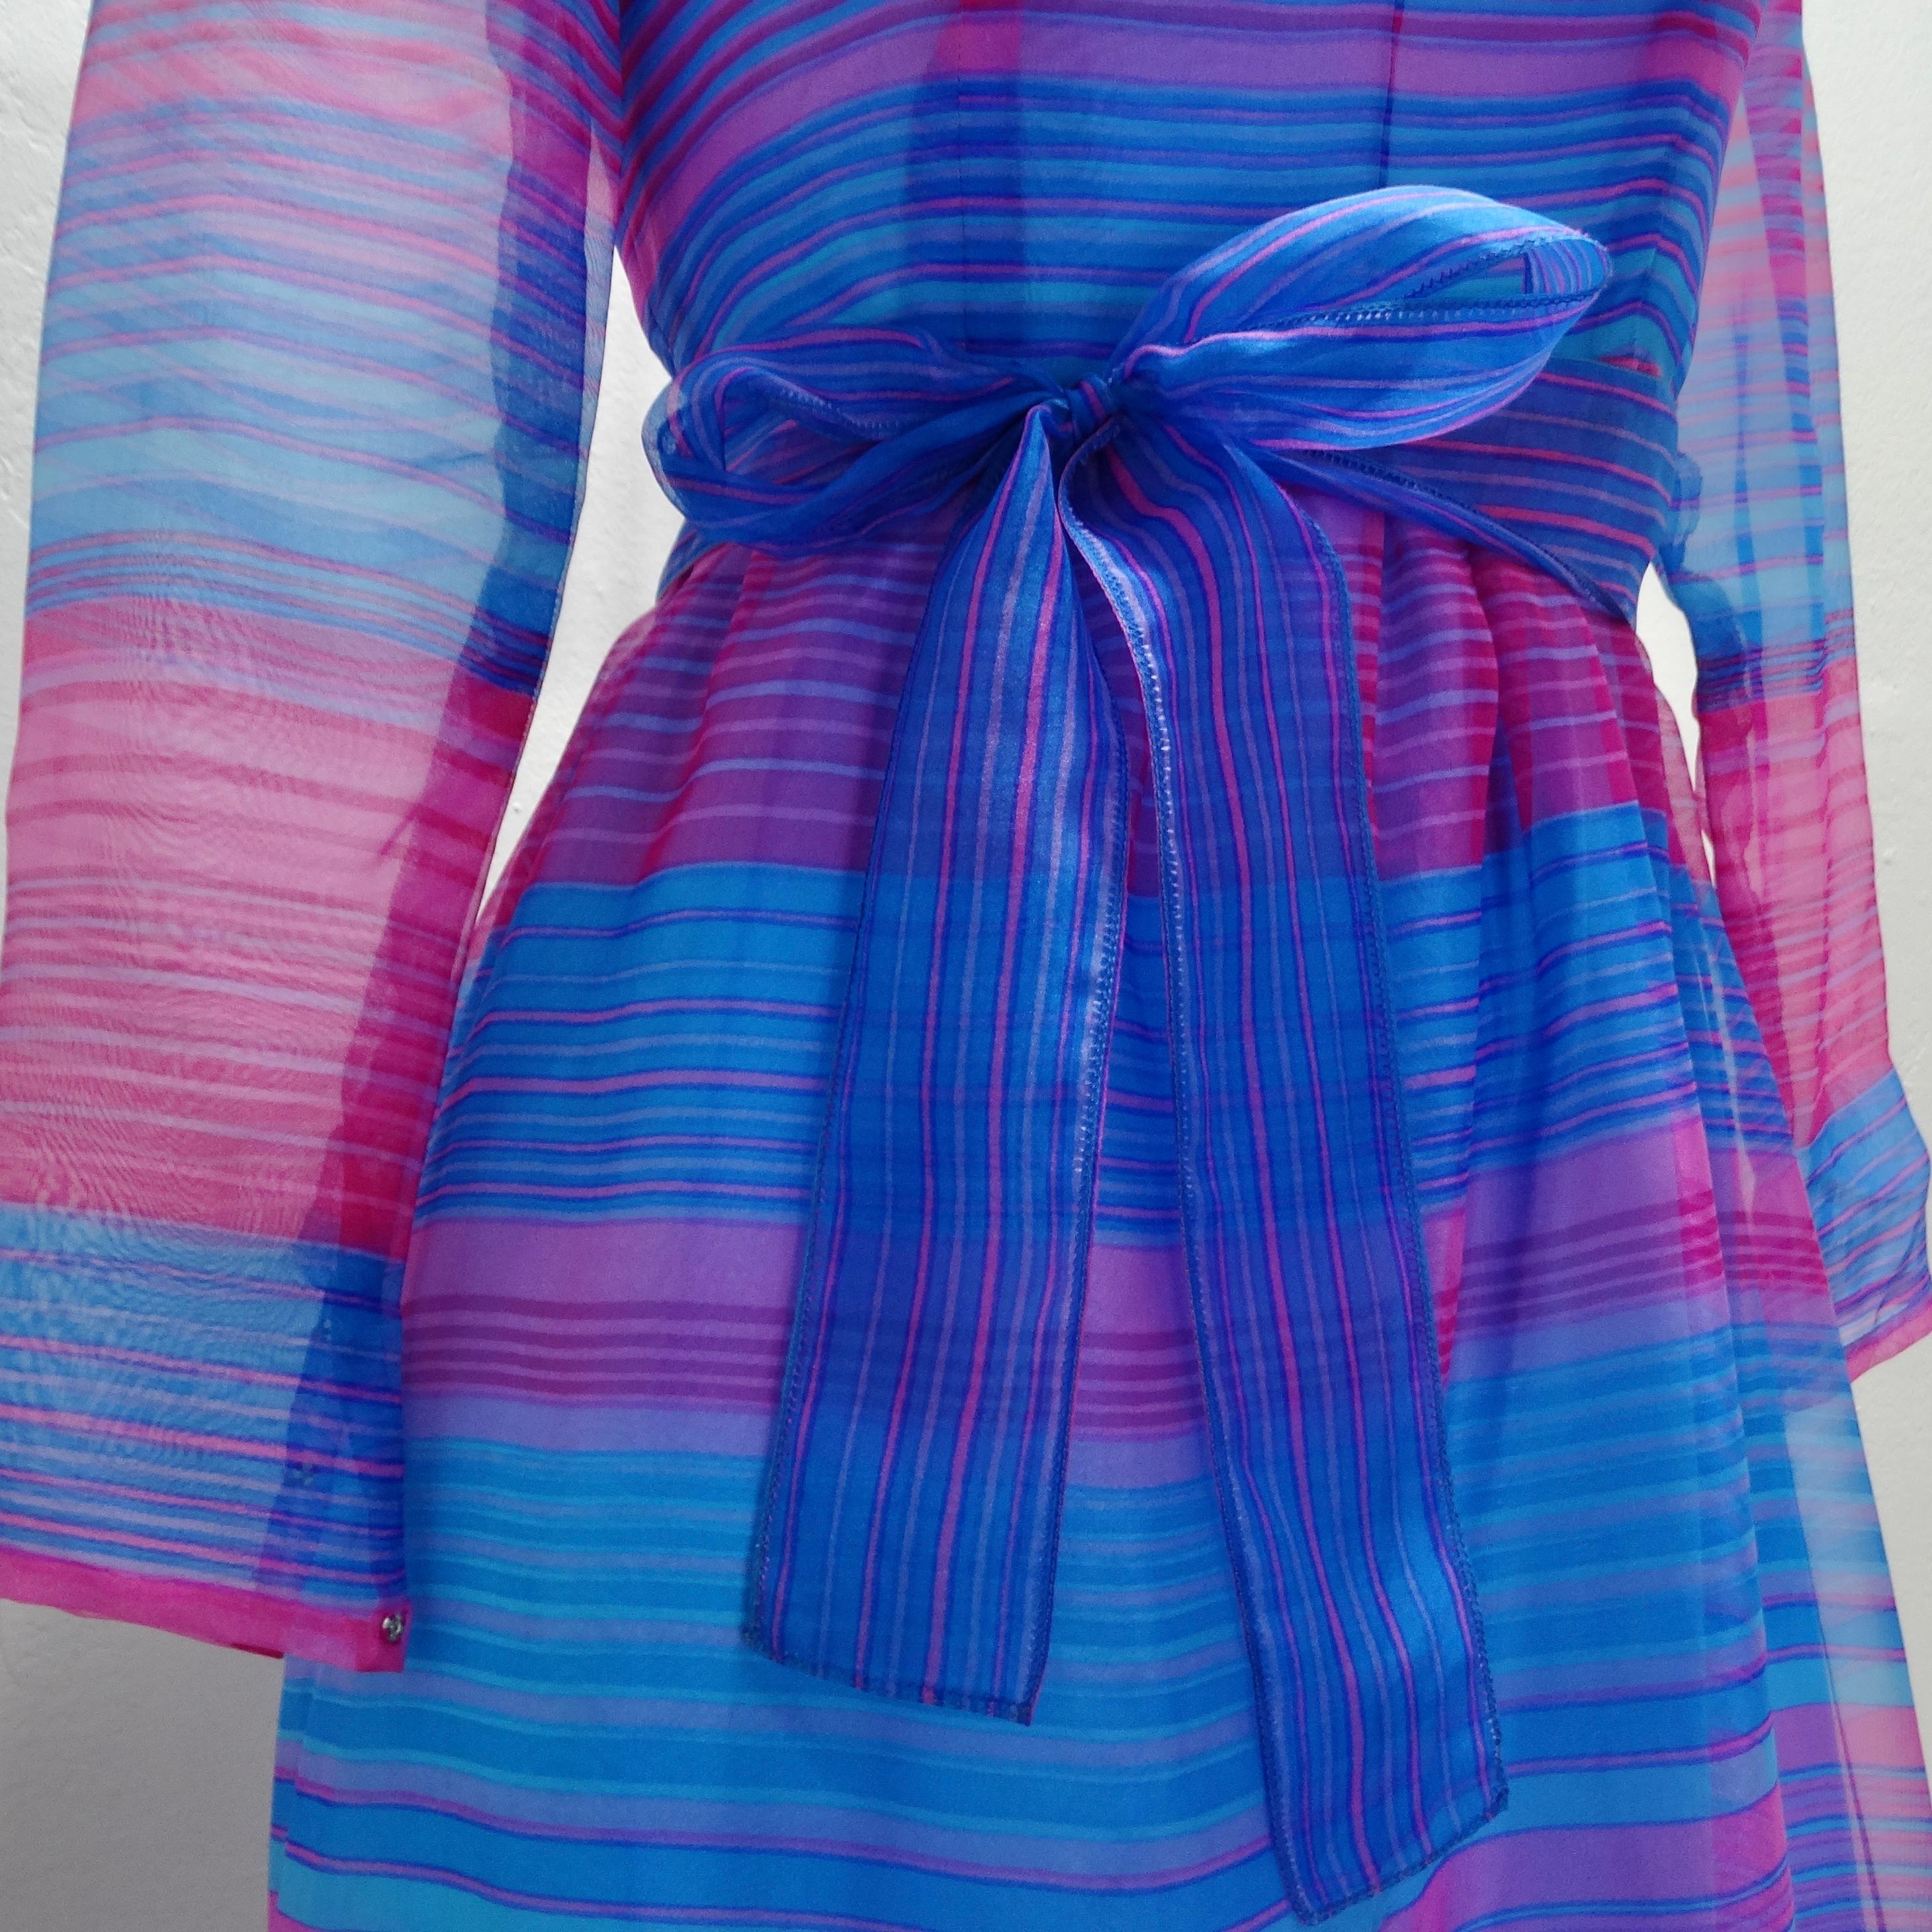 Givenchy 1980s Pink & Blue Stripe Dress In Excellent Condition For Sale In Scottsdale, AZ